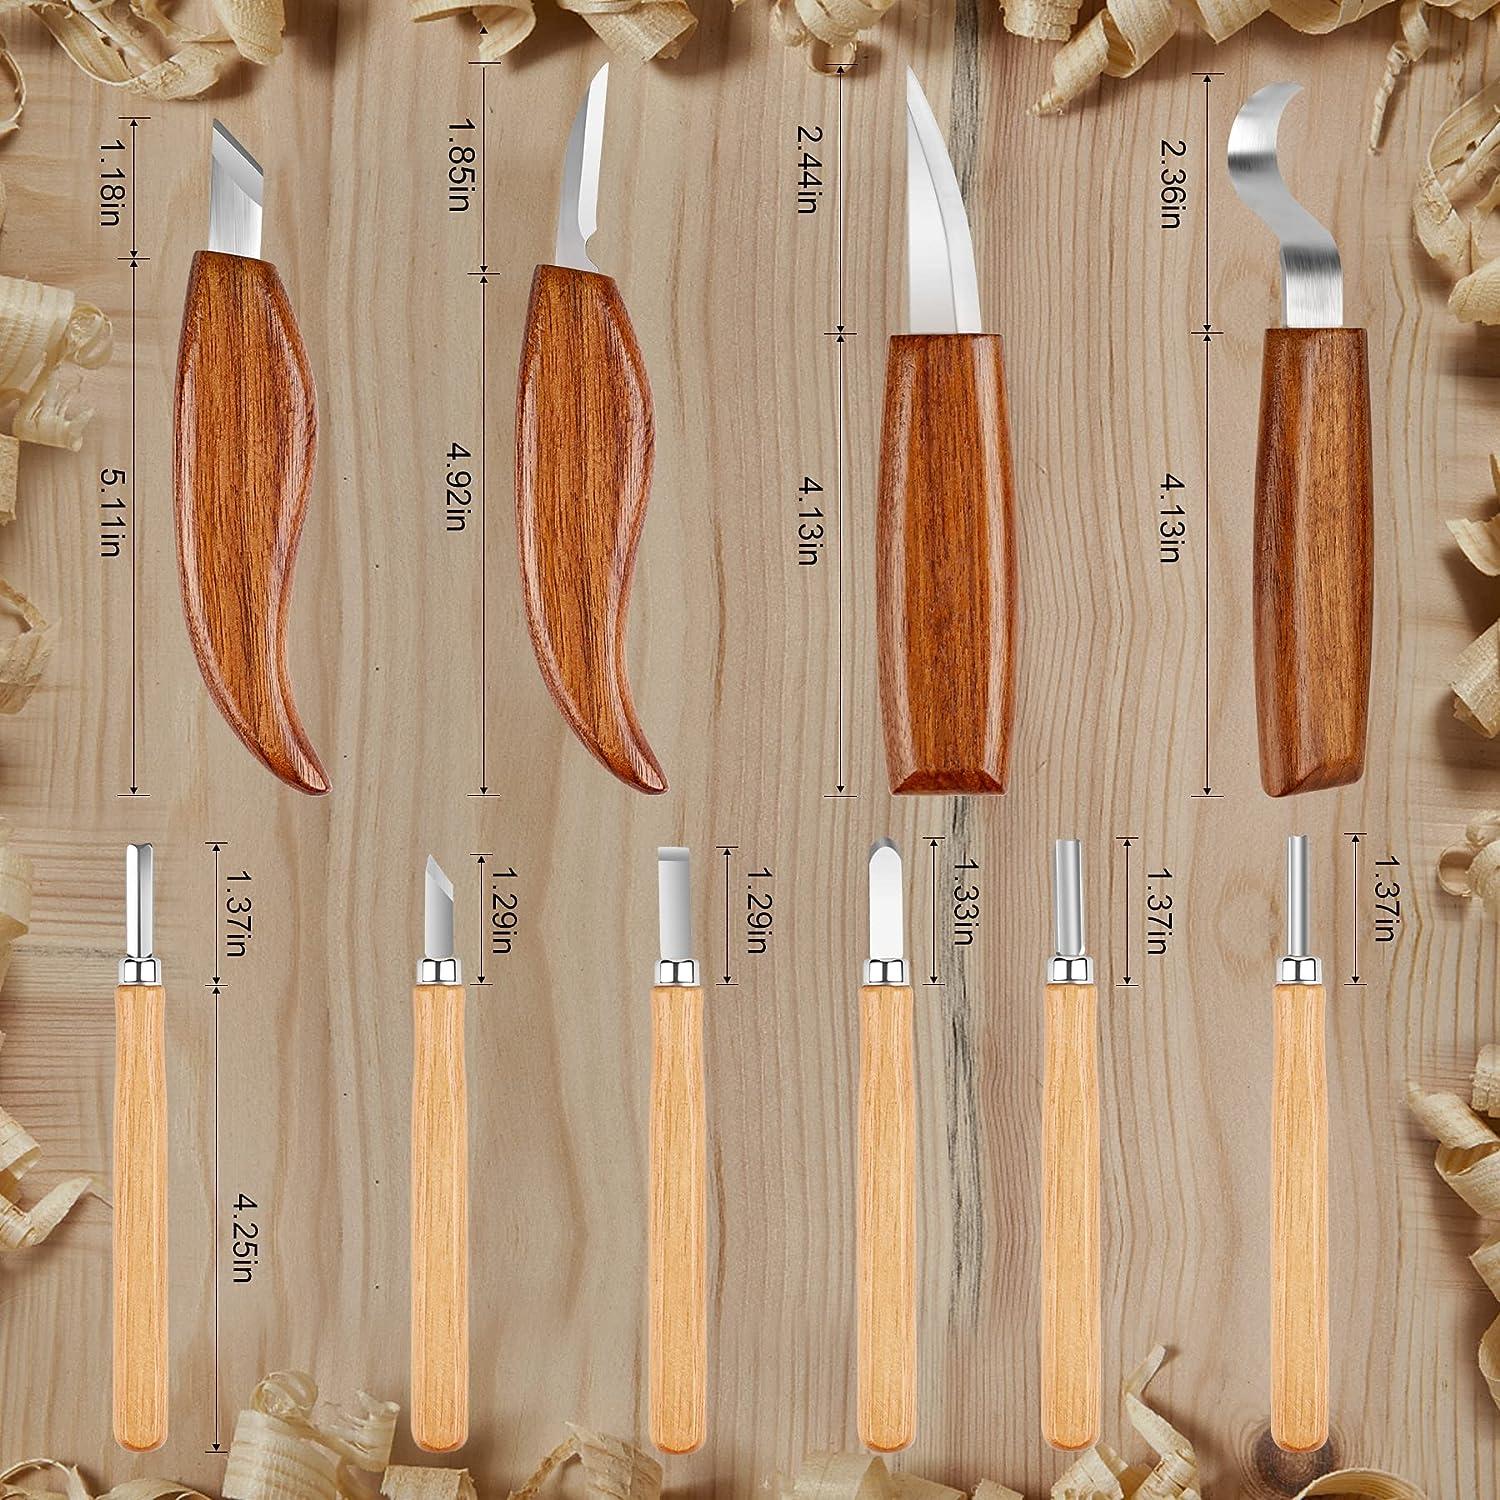 Olerqzer Wood Carving Tools for Beginners 12-in-1 Wood Carving Kit